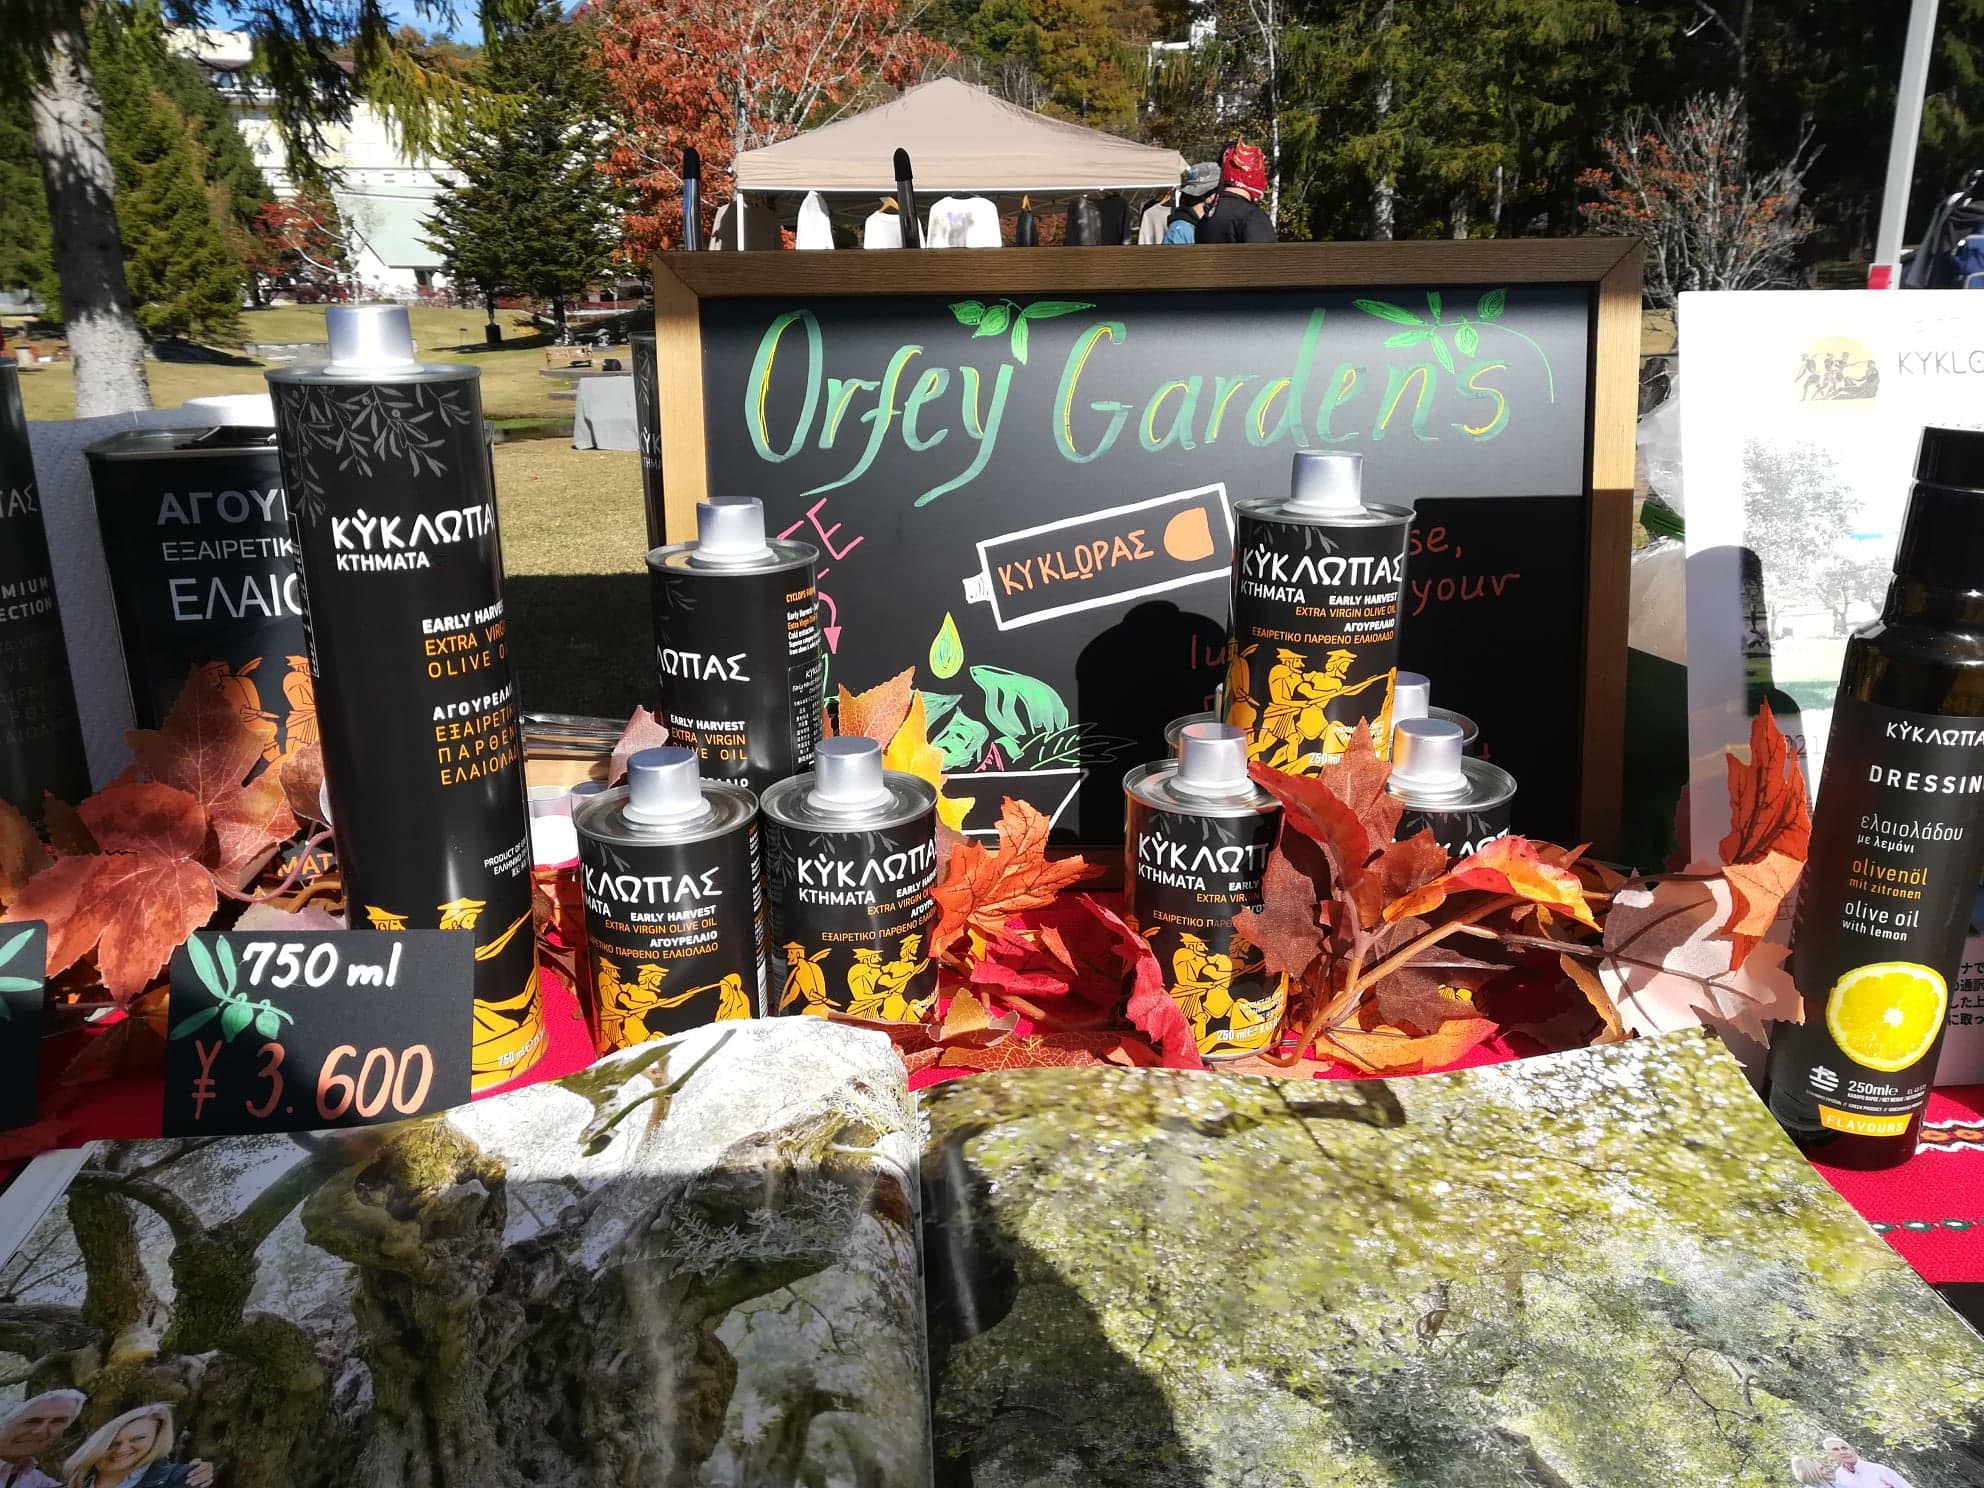 Orfey Gardens Event booth with Kyklopas Olive Oil 開催べんとでキクロパスを販売